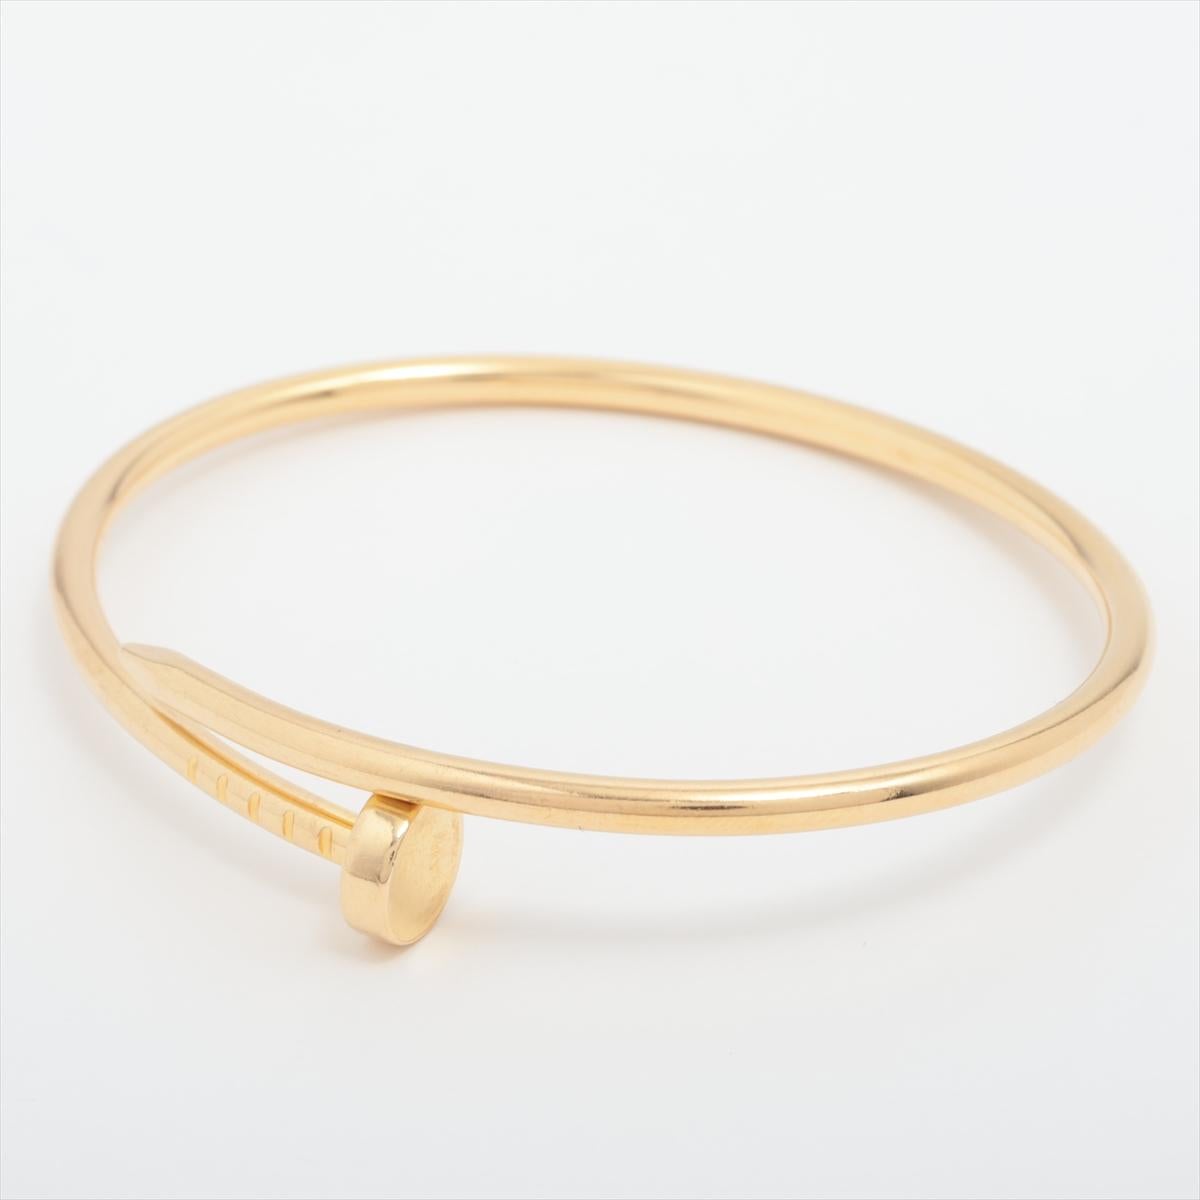 Brand : Cartier
Description: Cartier Juste un Clou SM Bracelet 
Metal Type: 750 (YG) /  Yellow Gold
Total Weight: 8.9g
Size: 15
Width: 2.5mm
Condition: Preowned; small signs of wearing
Box -  Not Included
Papers -  Not Included
